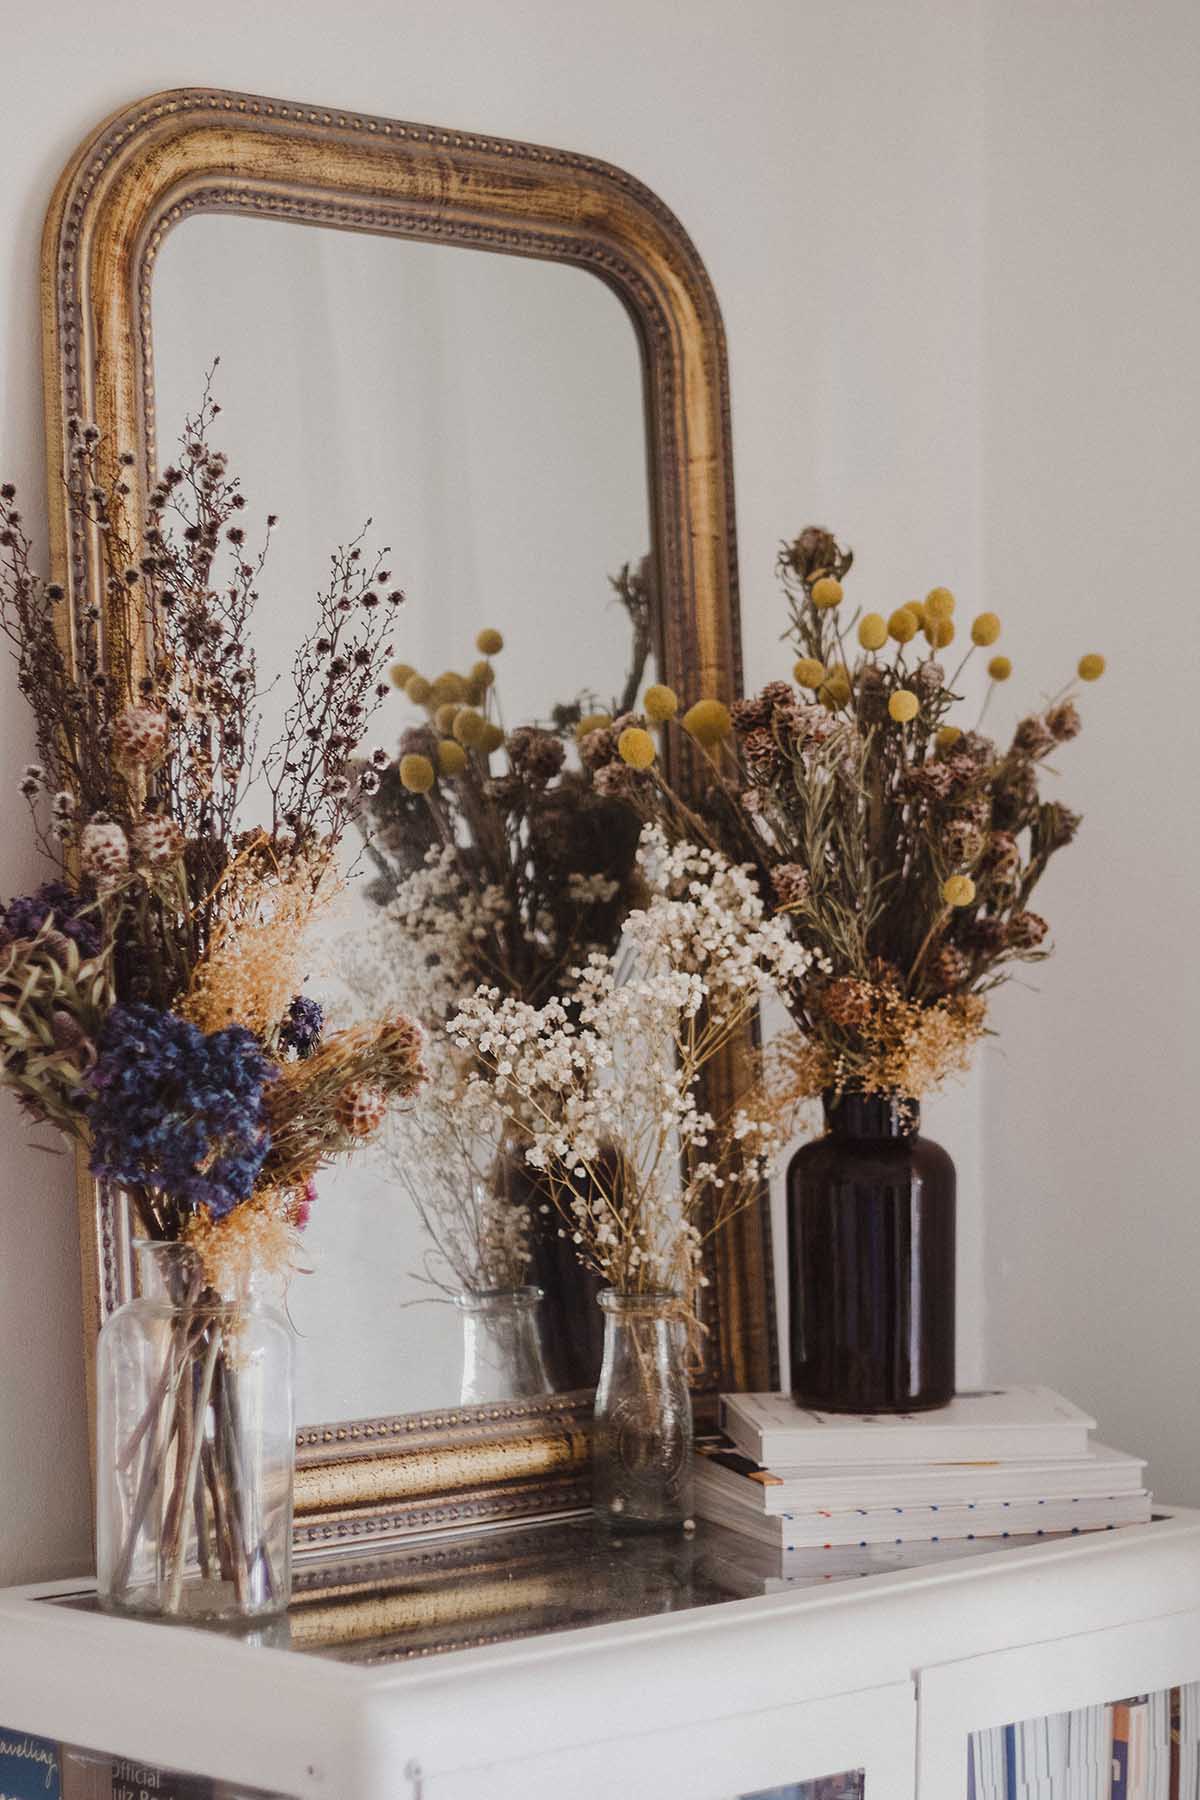 Dried Flower Decor - Vases by Large Mirror